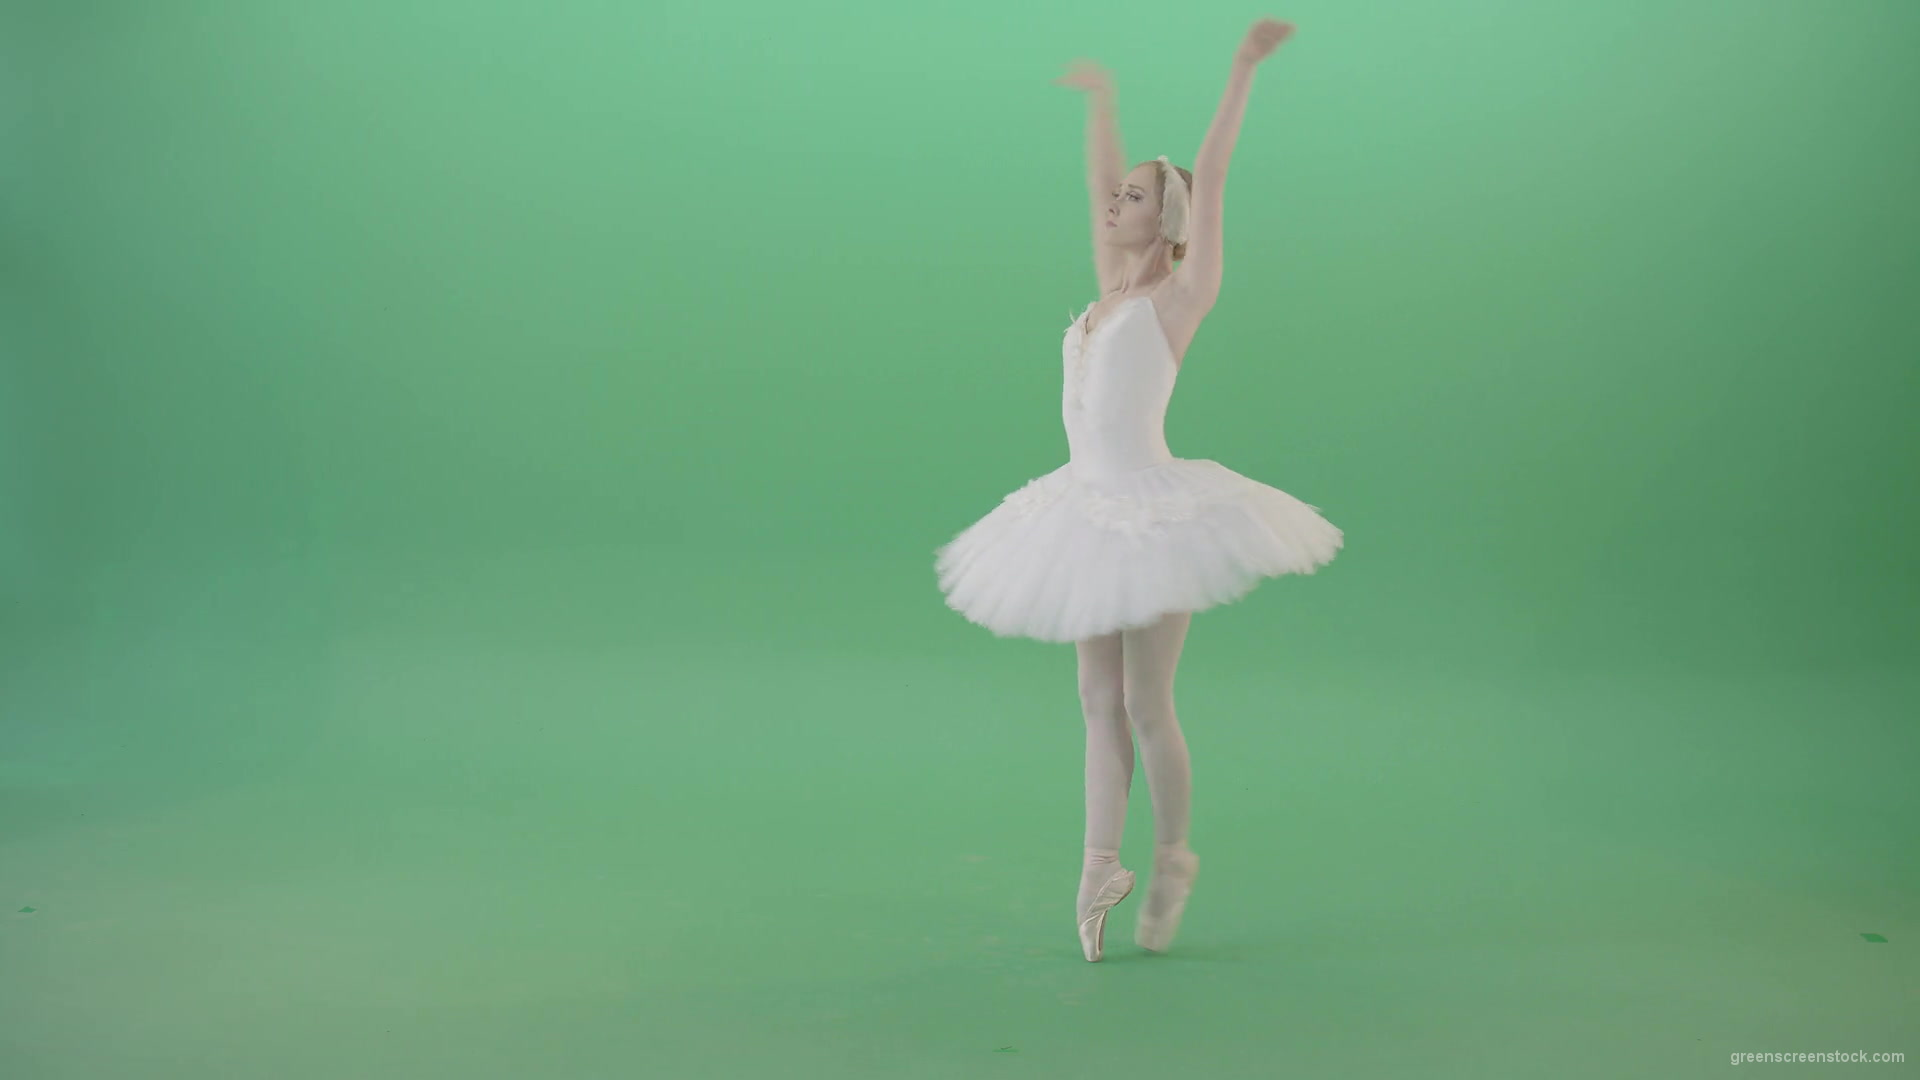 Luxury-ballet-girl-ballerina-flying-in-the-sky-and-waving-hands-on-green-screen-4K-Video-Footage-1920_008 Green Screen Stock